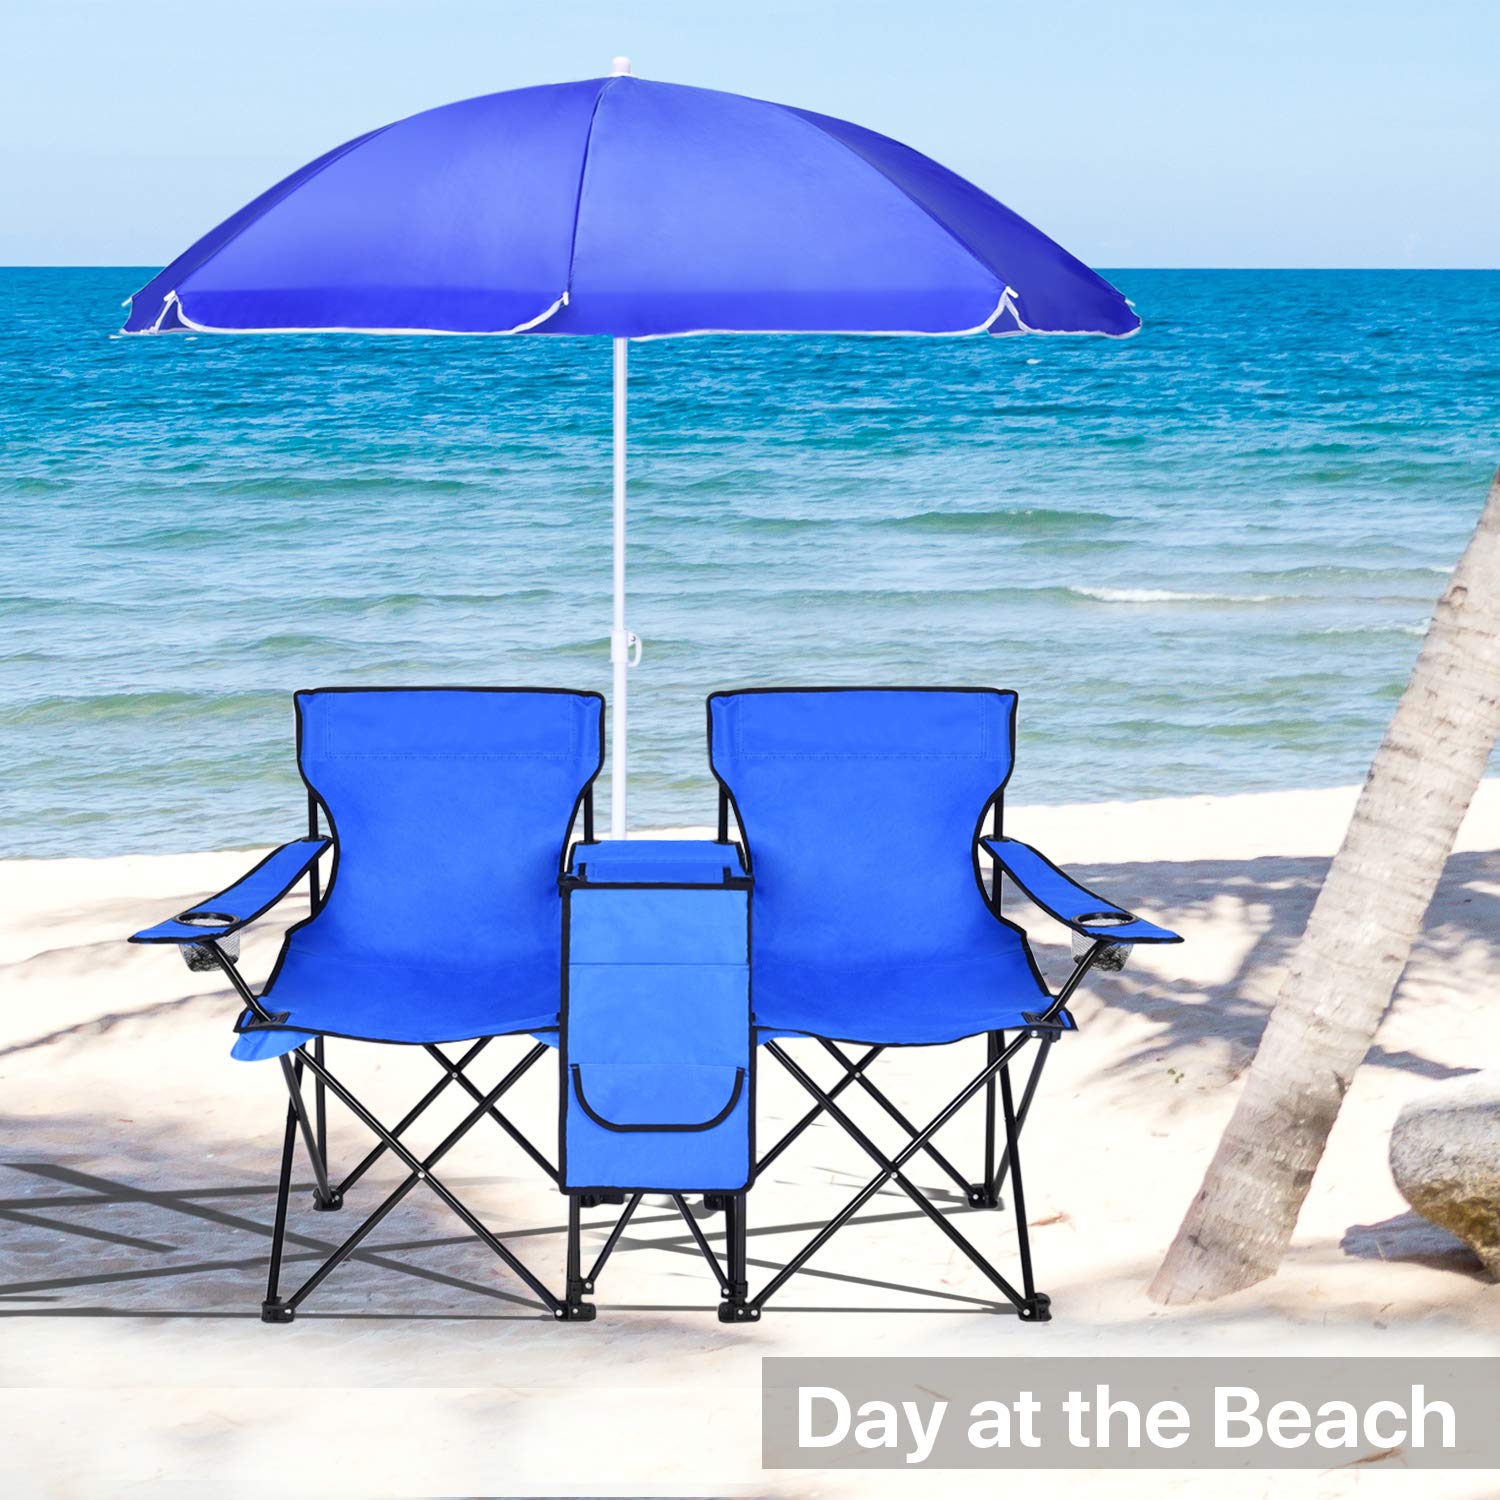 Beach Chair With Canopy, Folding Camping Chairs with Umbrella and Table Cooler, Portable Double-Chair with Beverage Holder for Beach, Camping, Picnic, Patio, Pool, Park, Outdoor, Blue, I5418 - image 1 of 9